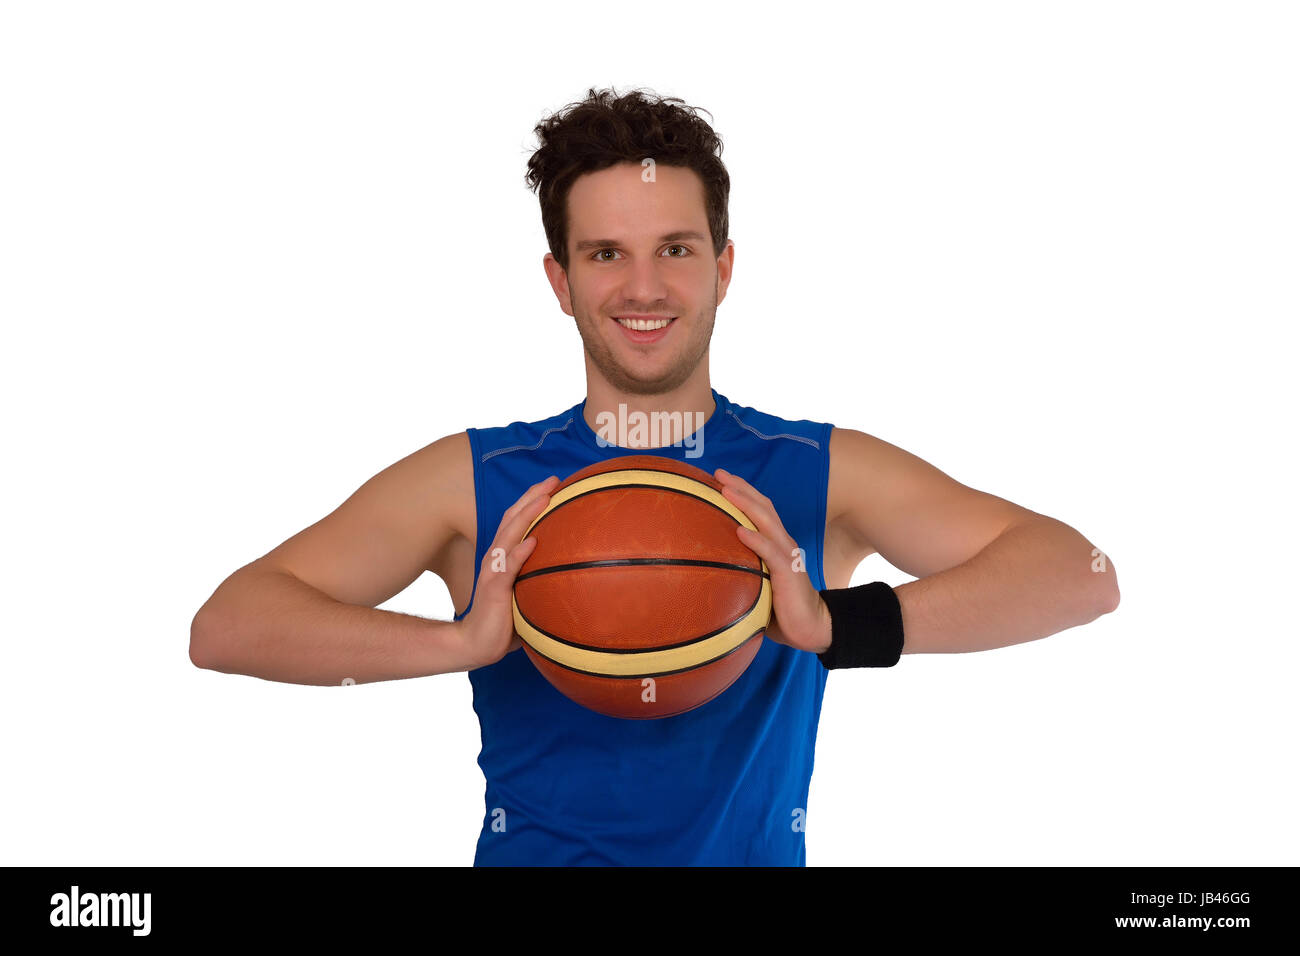 young basketball player isolated Stock Photo